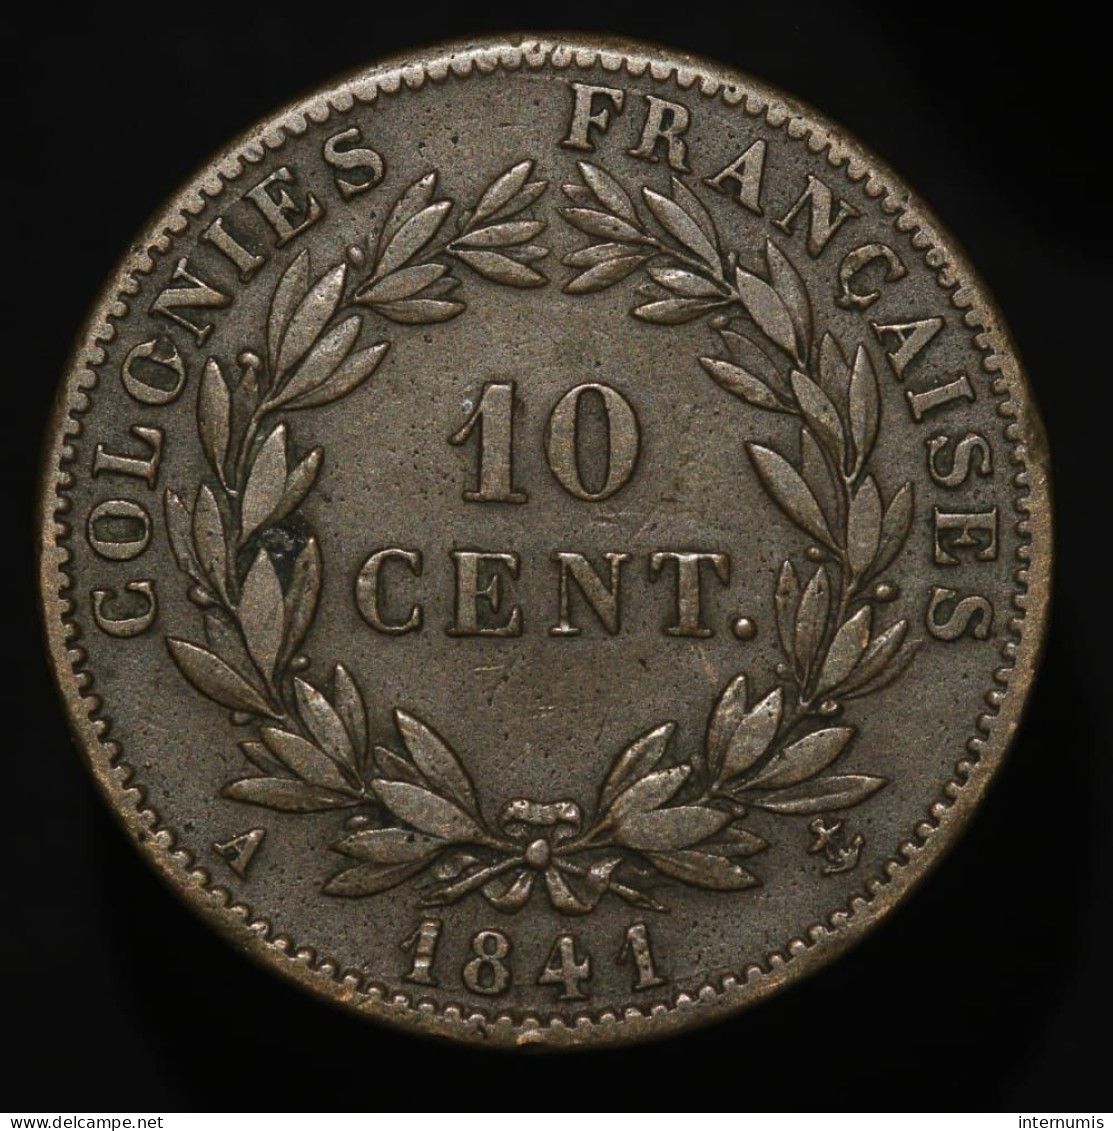 France, Louis-Philippe I, 10 Centimes, 1841-A, Guadeloupe, Bronze, TTB (EF), KM#13, Lec.316 - French Colonies (1817-1844)